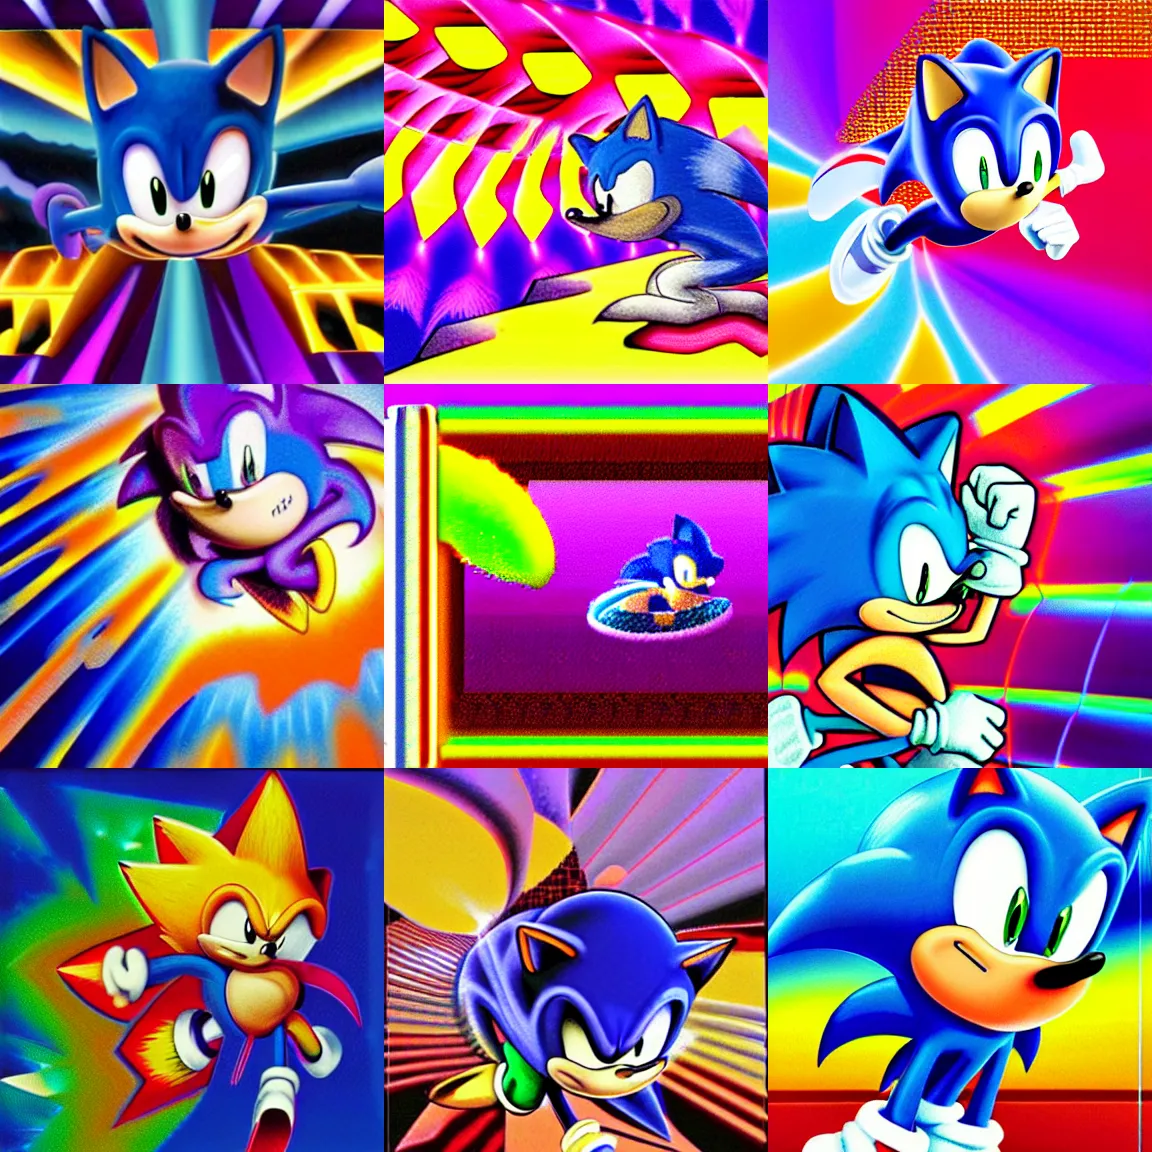 Prompt: sonic the hedgehog in a surreal, sharp, detailed professional, high quality portrait sonic airbrush art mgmt album cover portrait of a liquid dissolving lsd dmt sonic the hedgehog surfing through cyberspace, purple checkerboard background, 1 9 9 0 s 1 9 9 2 sega genesis video game album cover